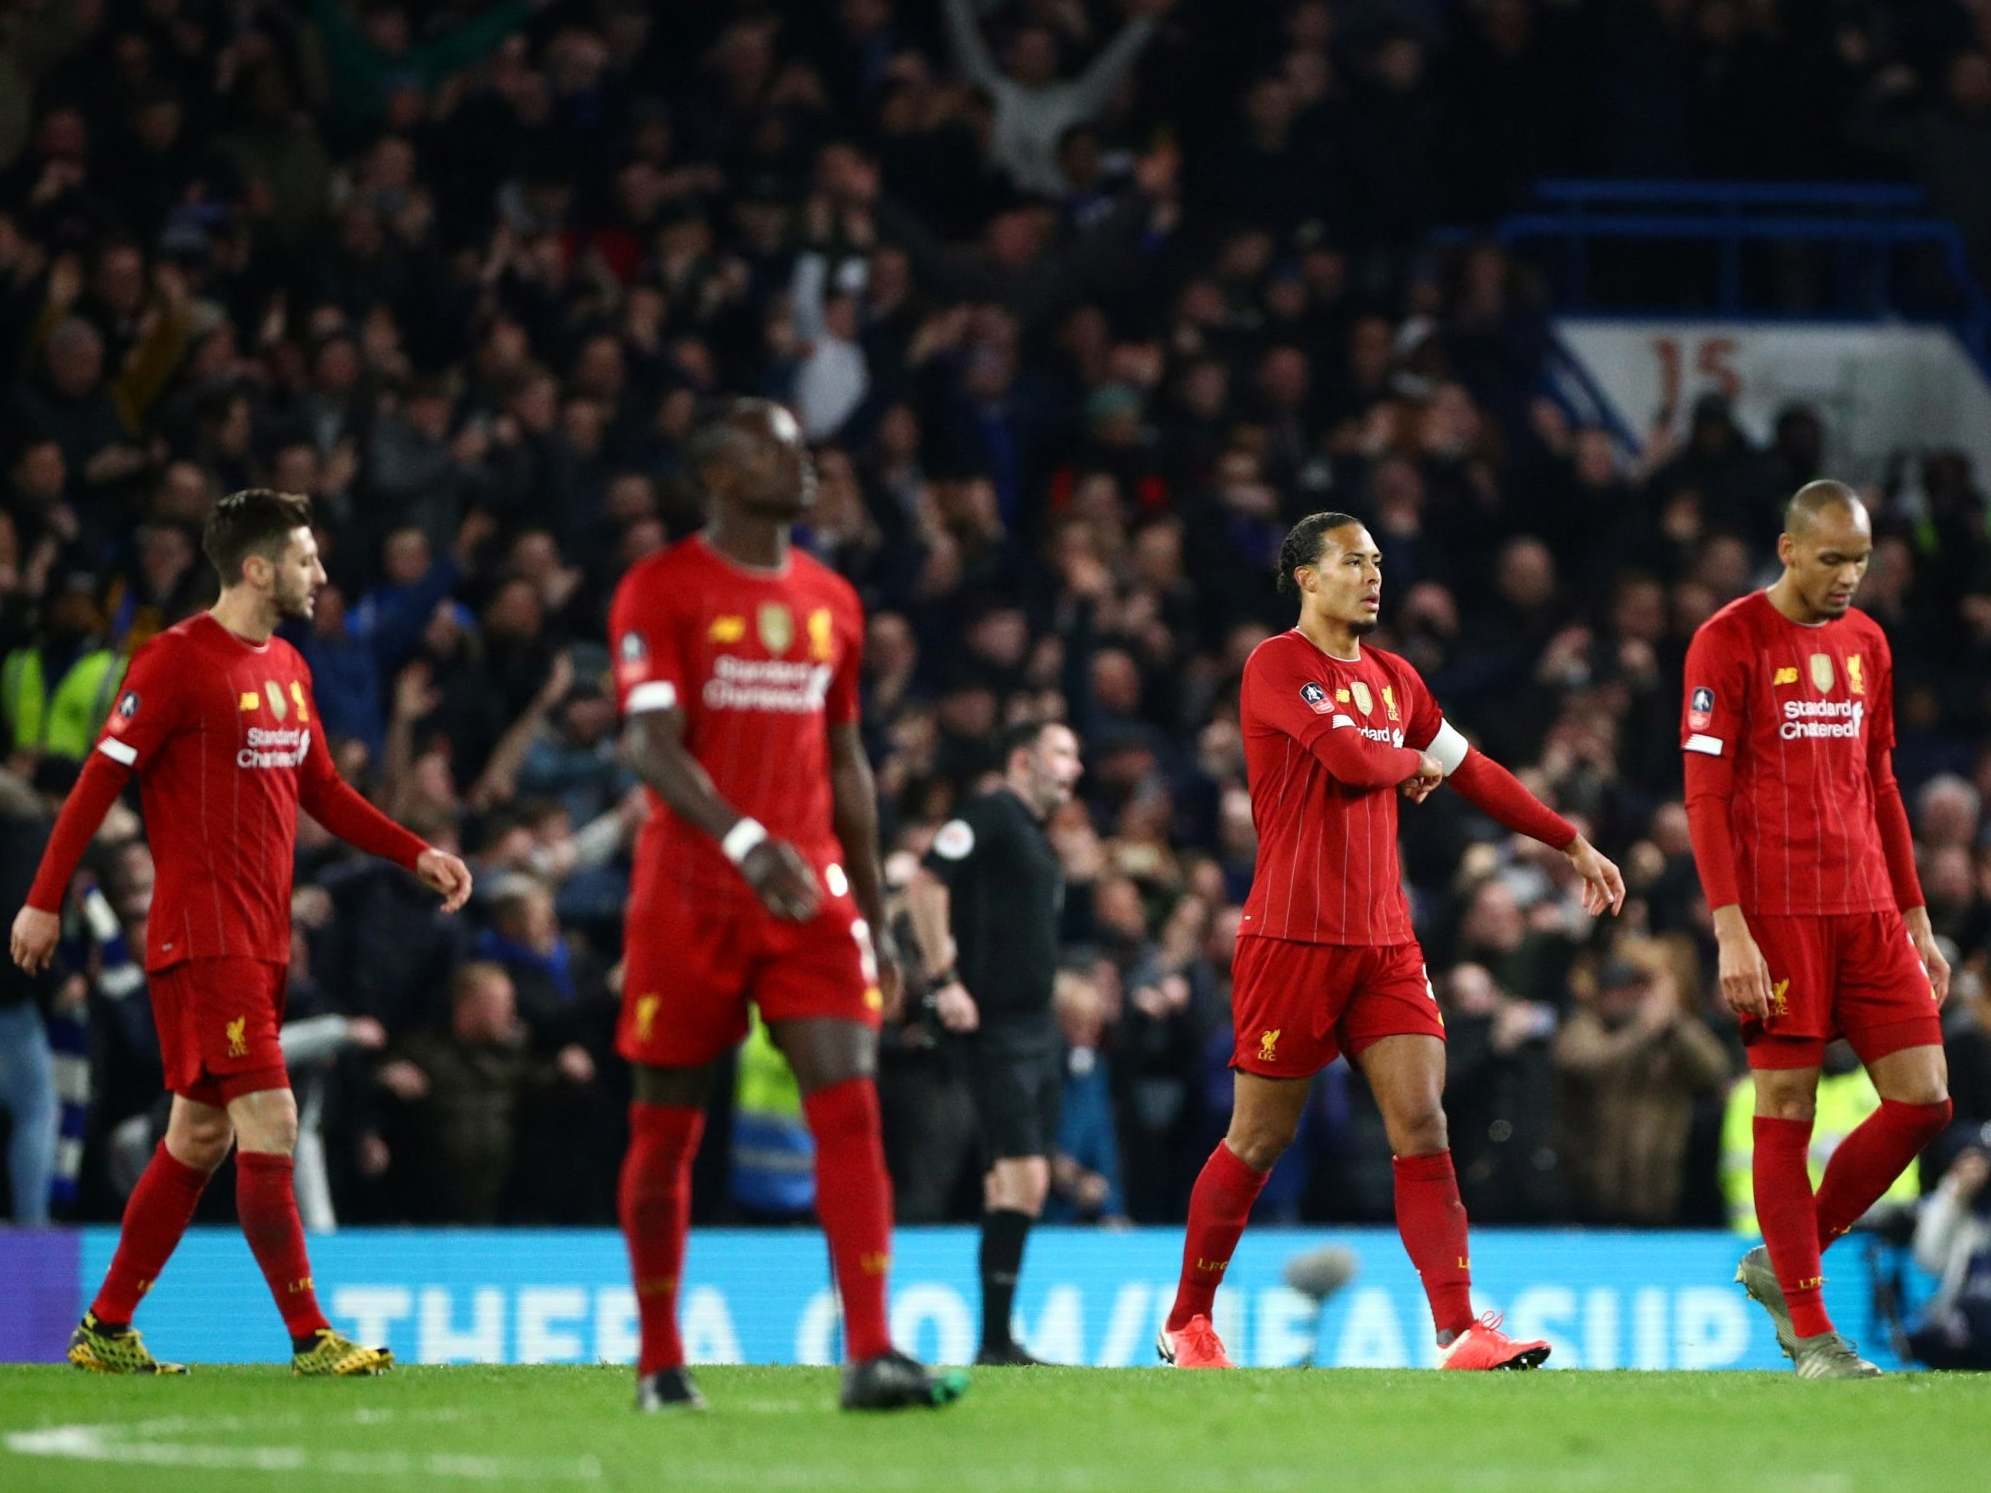 Liverpool respond after Chelsea score a second in their 2-0 win over the Reds